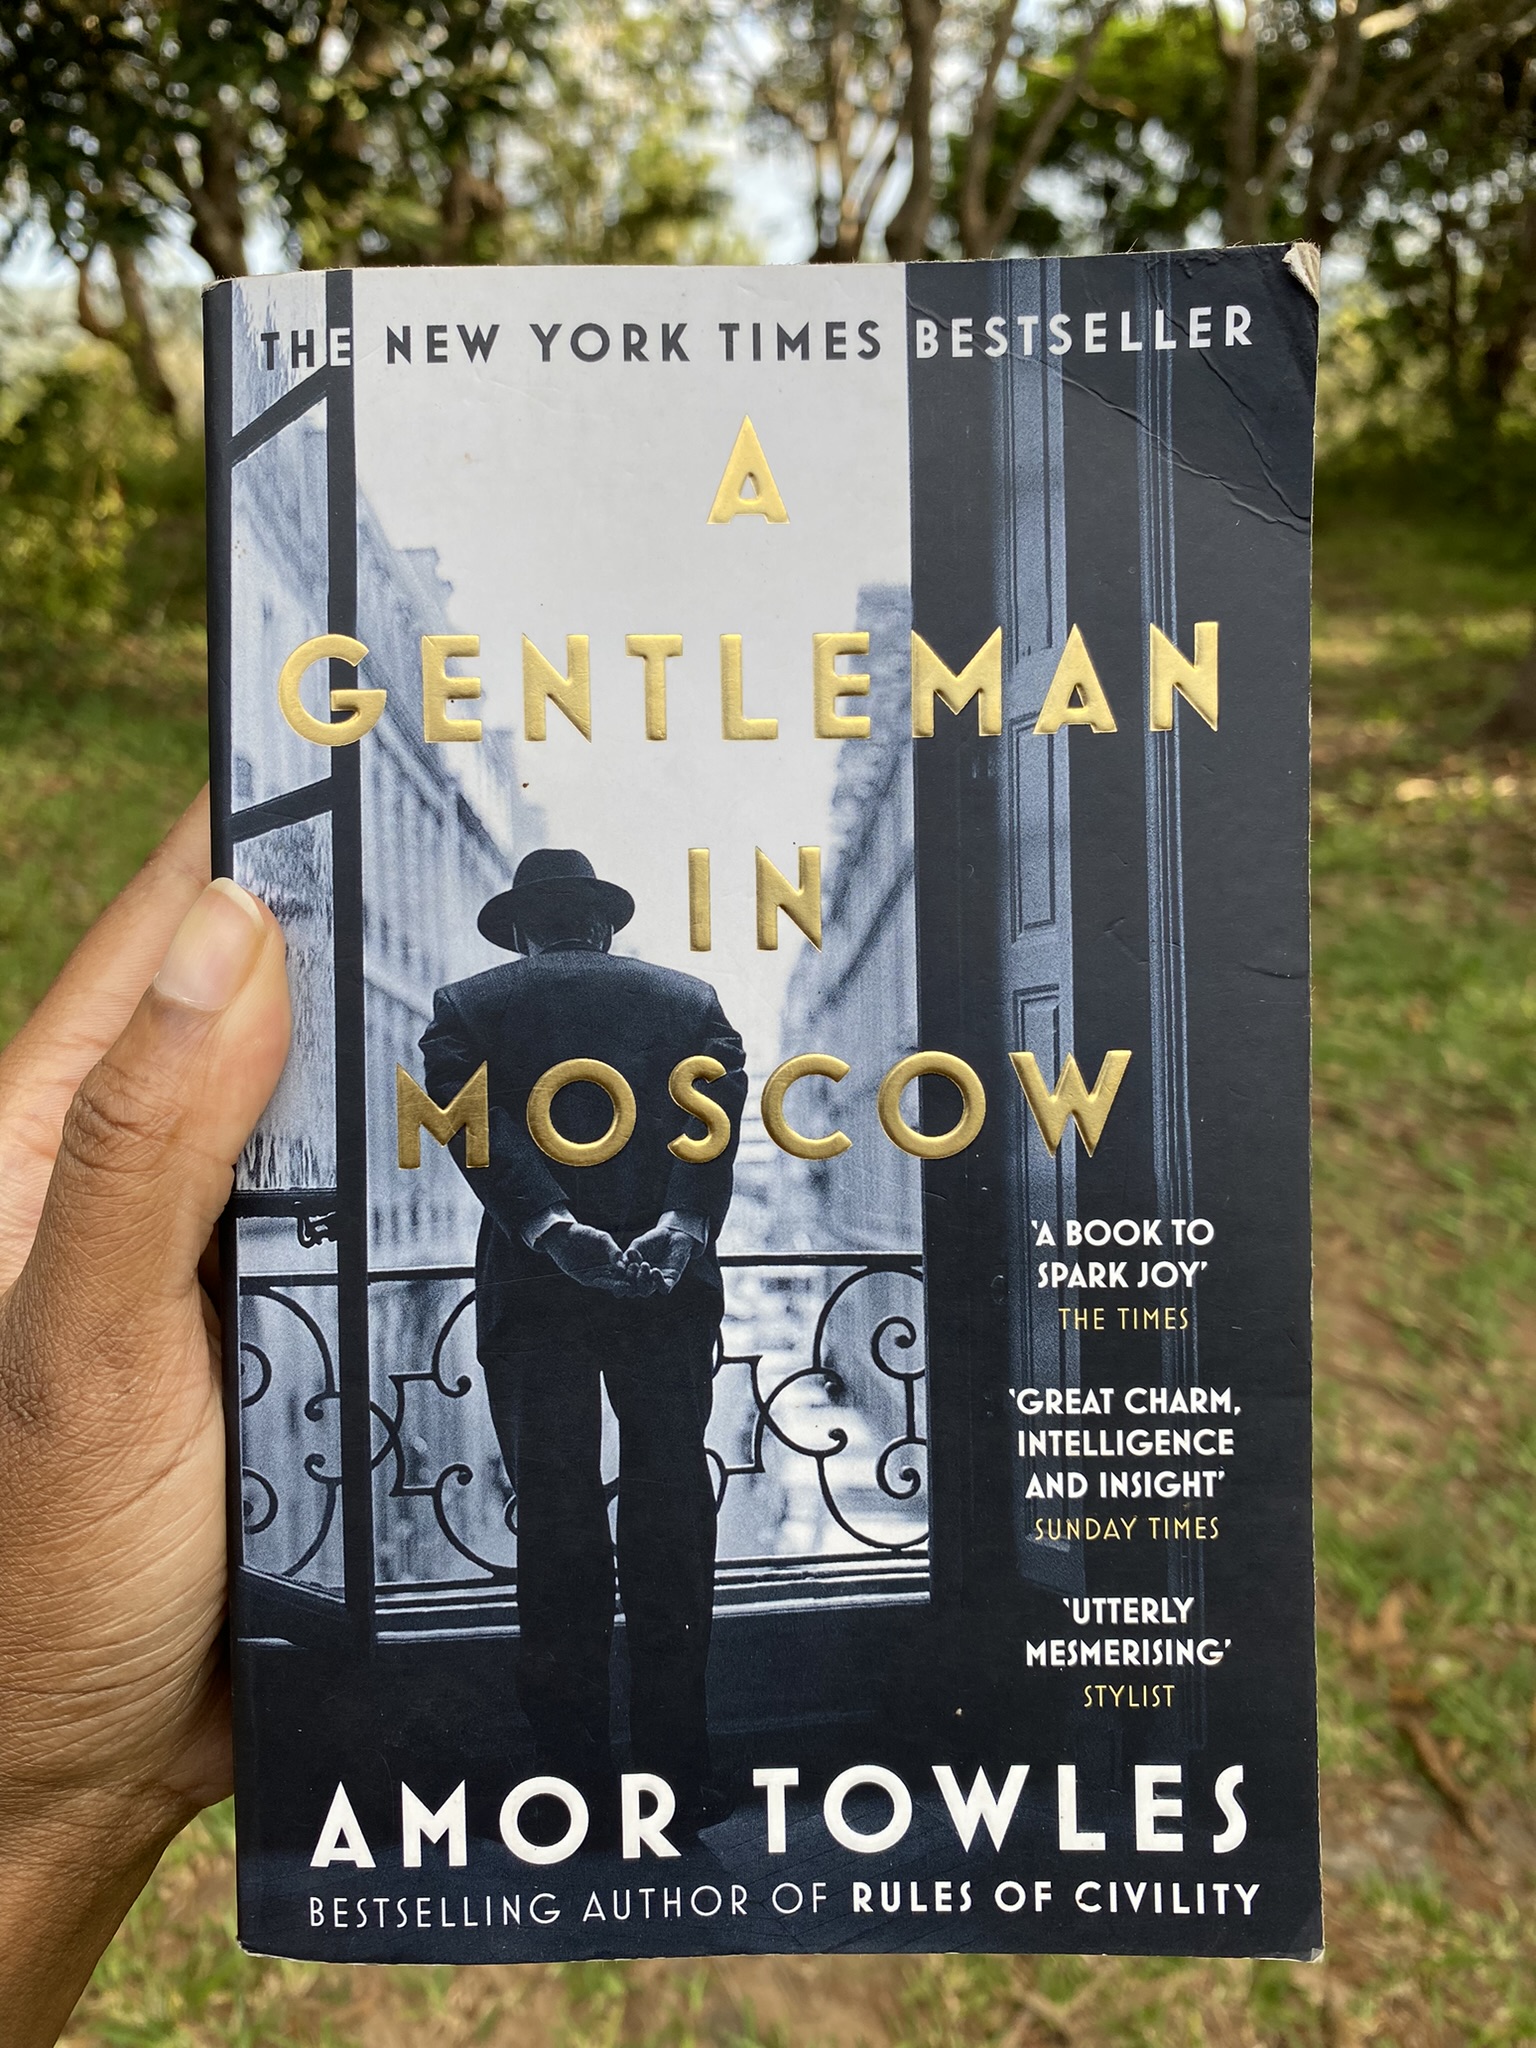 A hand holing a copy of A Gentleman in Moscow by Amor Towles with scenic background